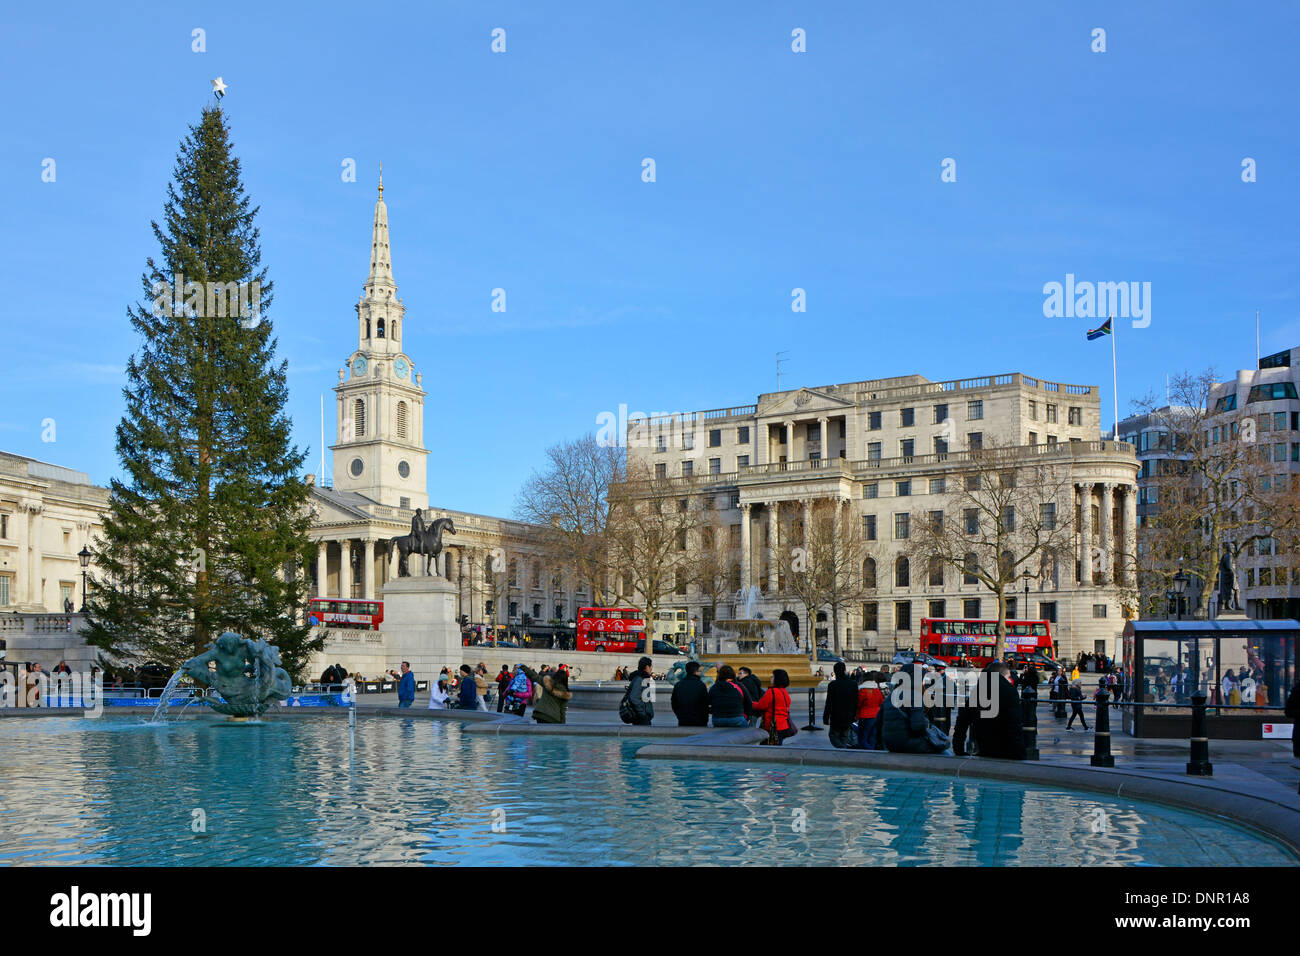 Christmas Tree in Trafalgar Square with South Africa House and church & spire of St Martin in the Fields blue sky day London England UK Stock Photo